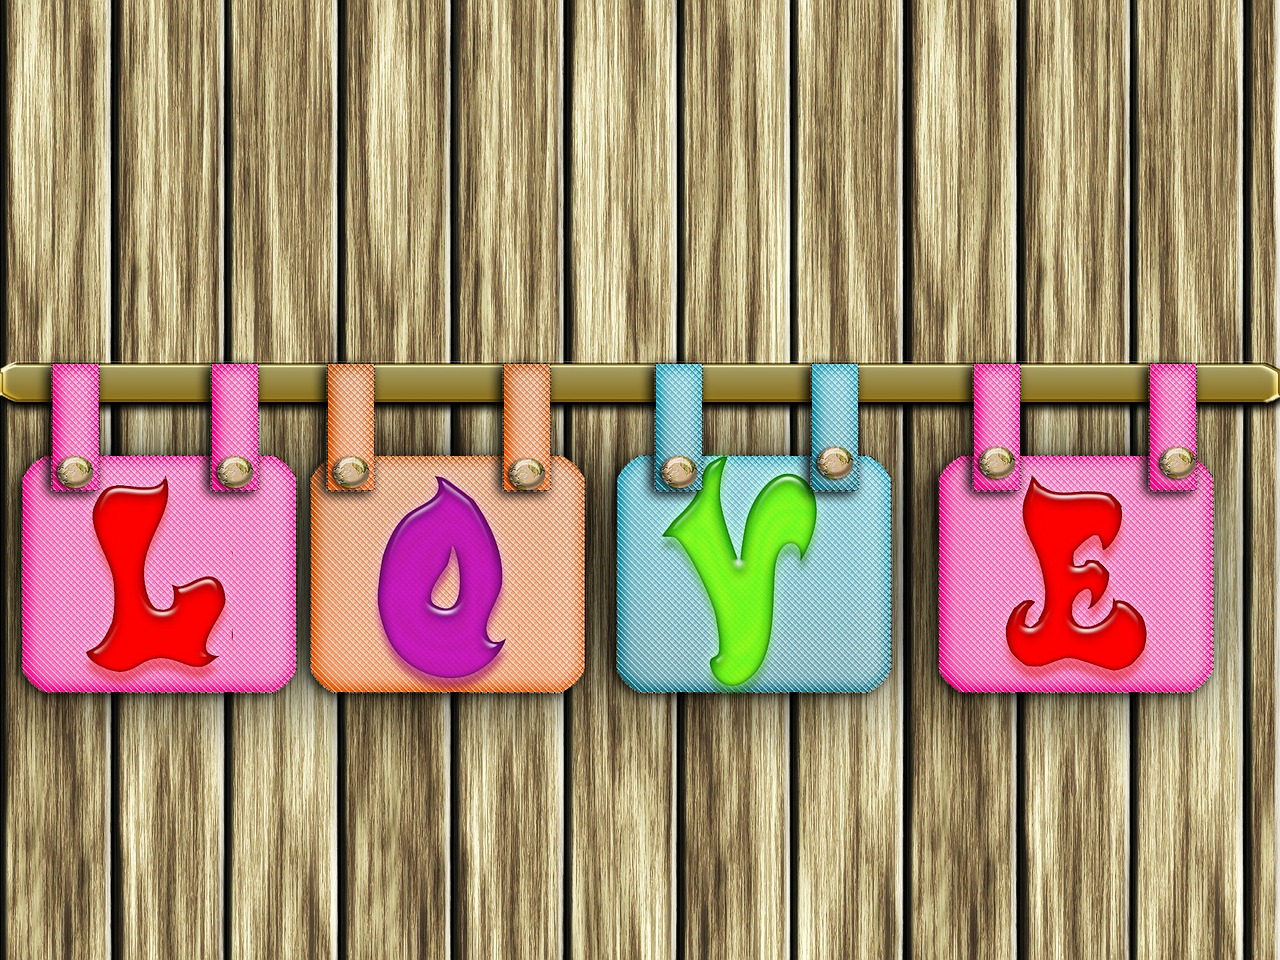 love pillow wooden wall free photo